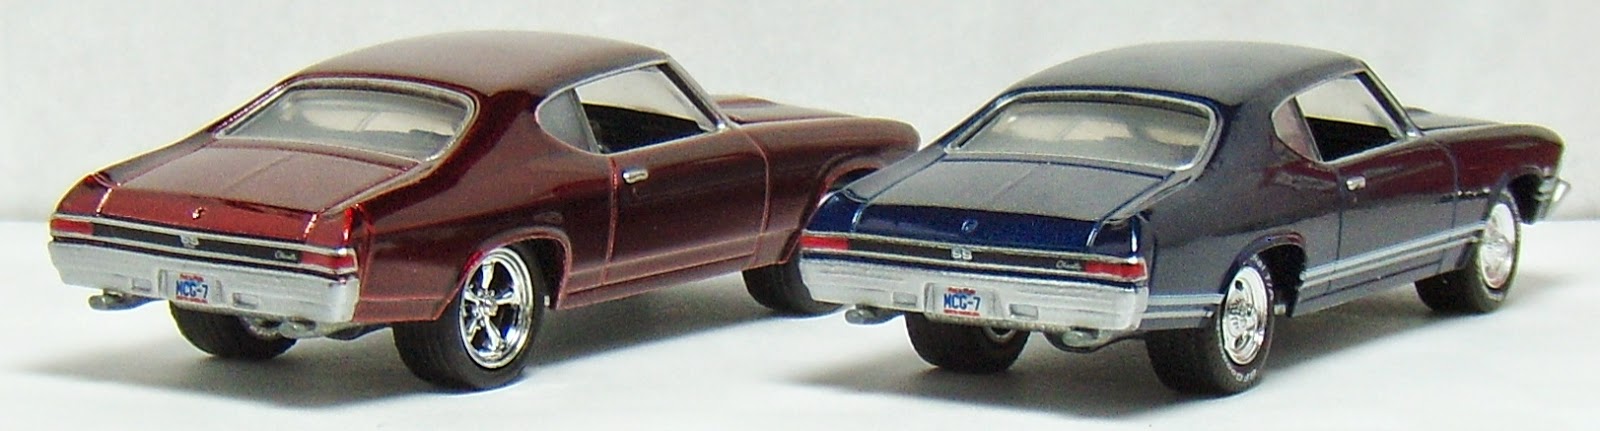 Greenlight 1968 and 1969 Chevrolet Chevelle SS